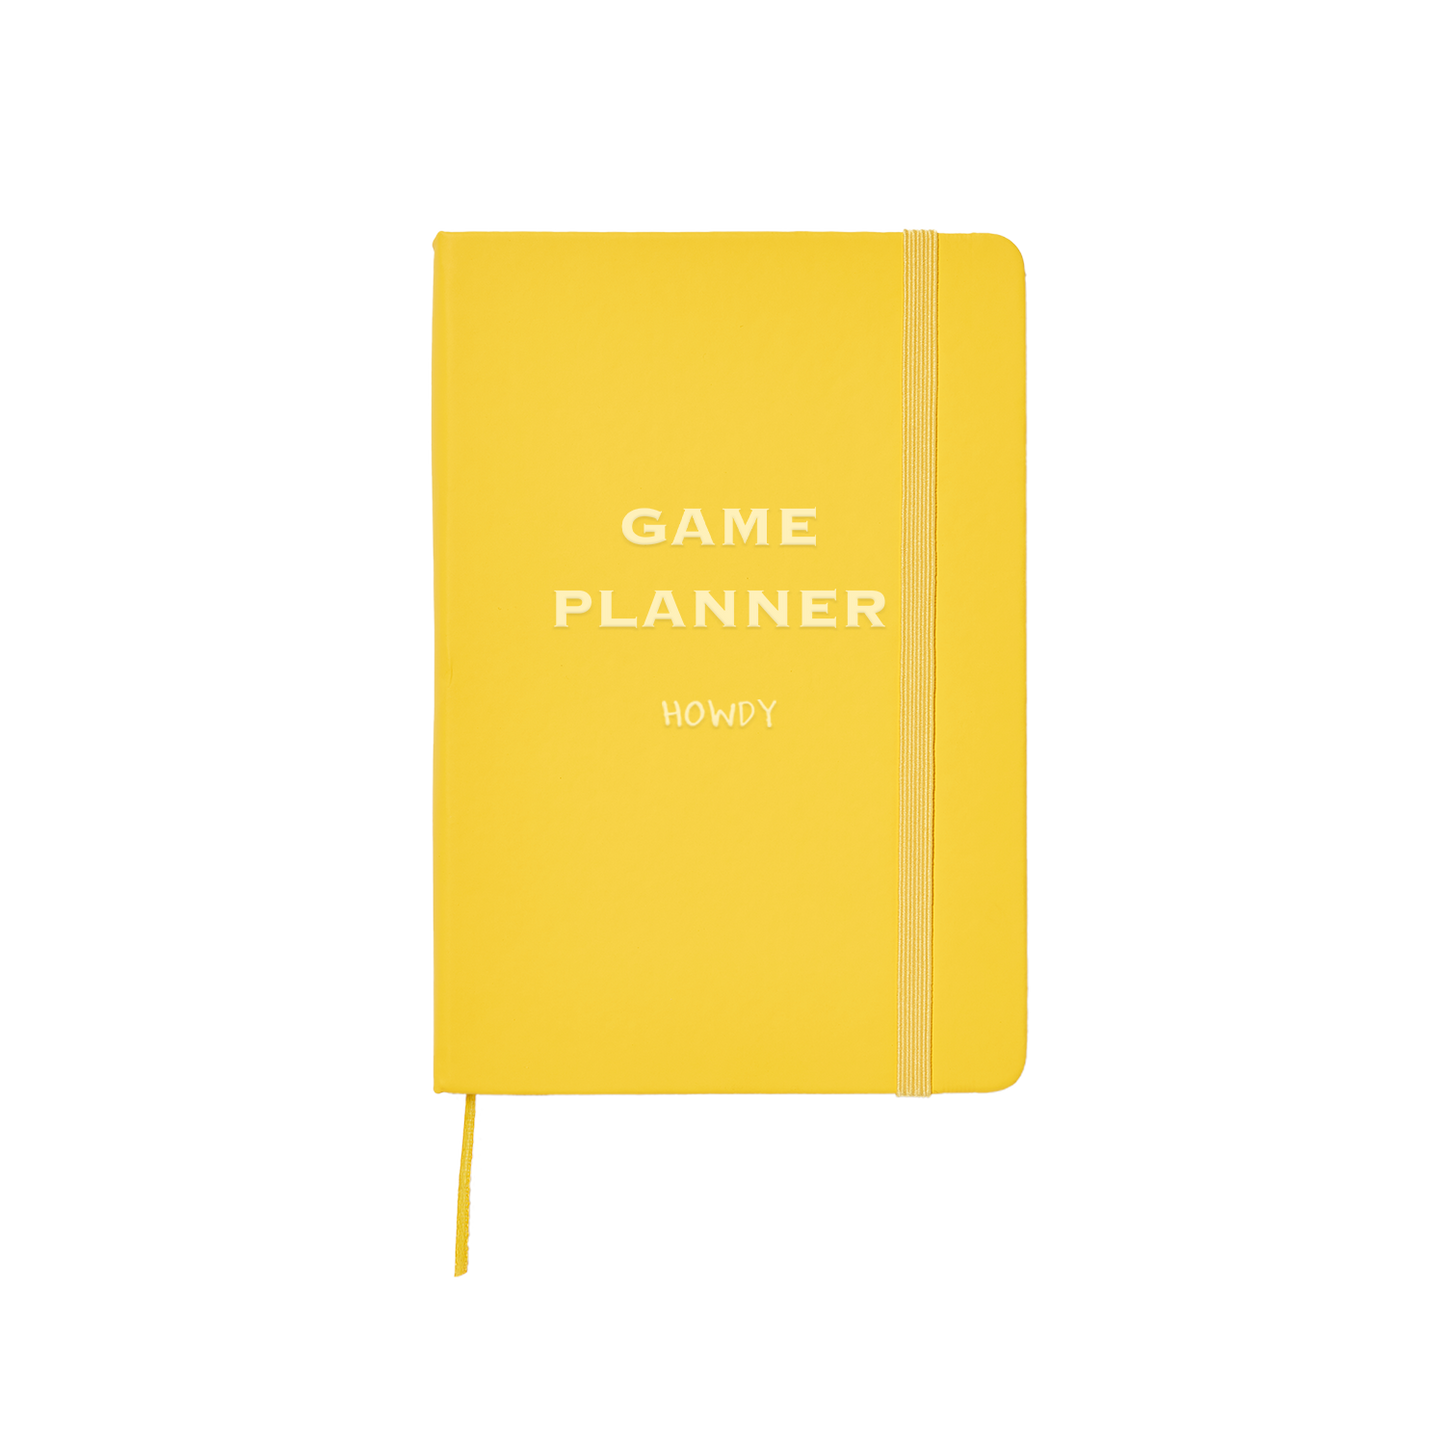 GAME PLANNER